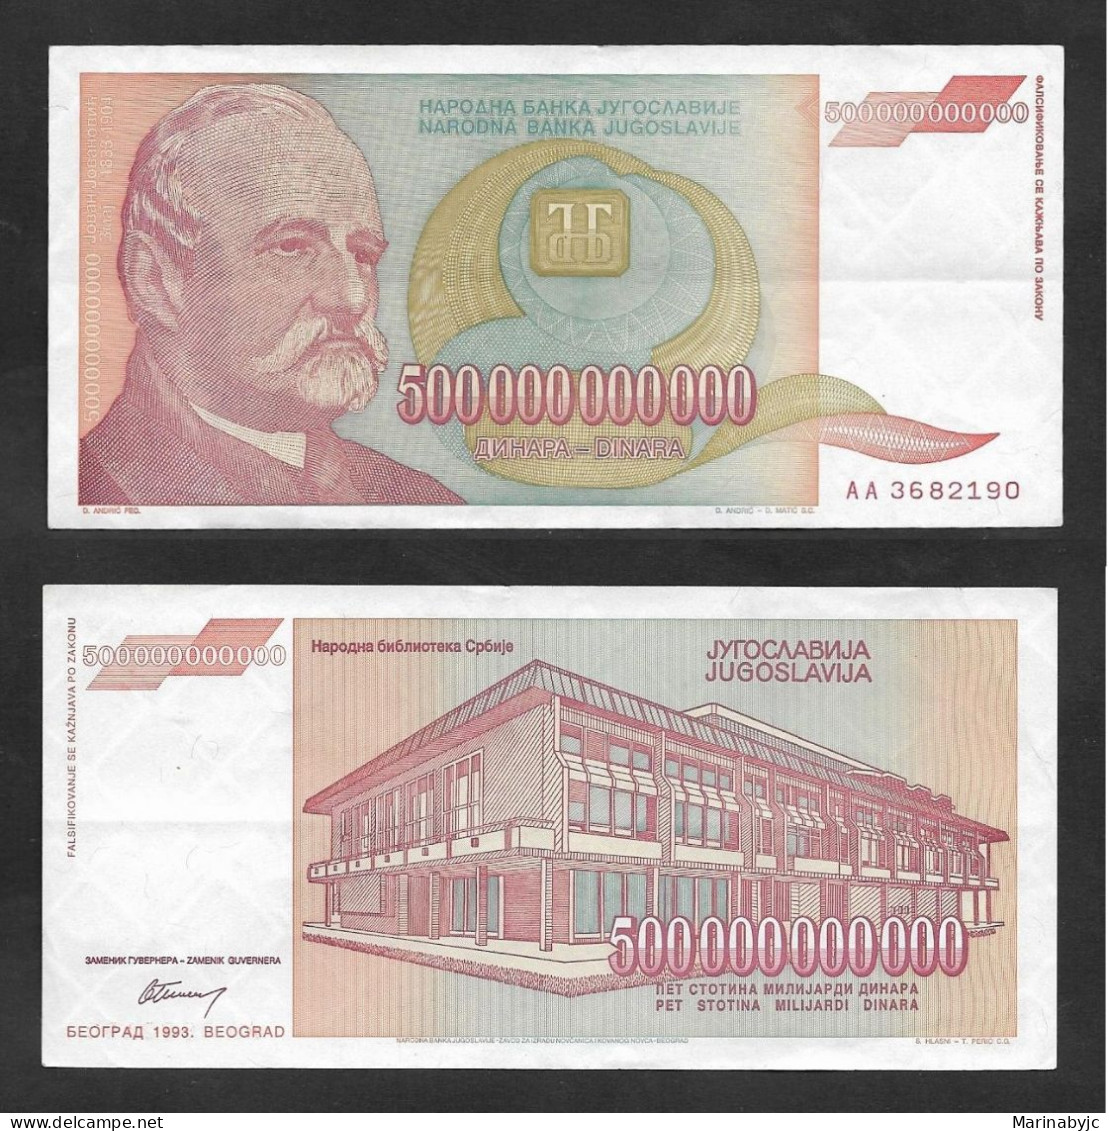 SE)1993 YUGOSLAVIA, BANKNOTE OF 500,000,000,000 DINARS OF THE CENTRAL BANK OF YUGOSLAVIA, WITH REVERSE, VF - Used Stamps